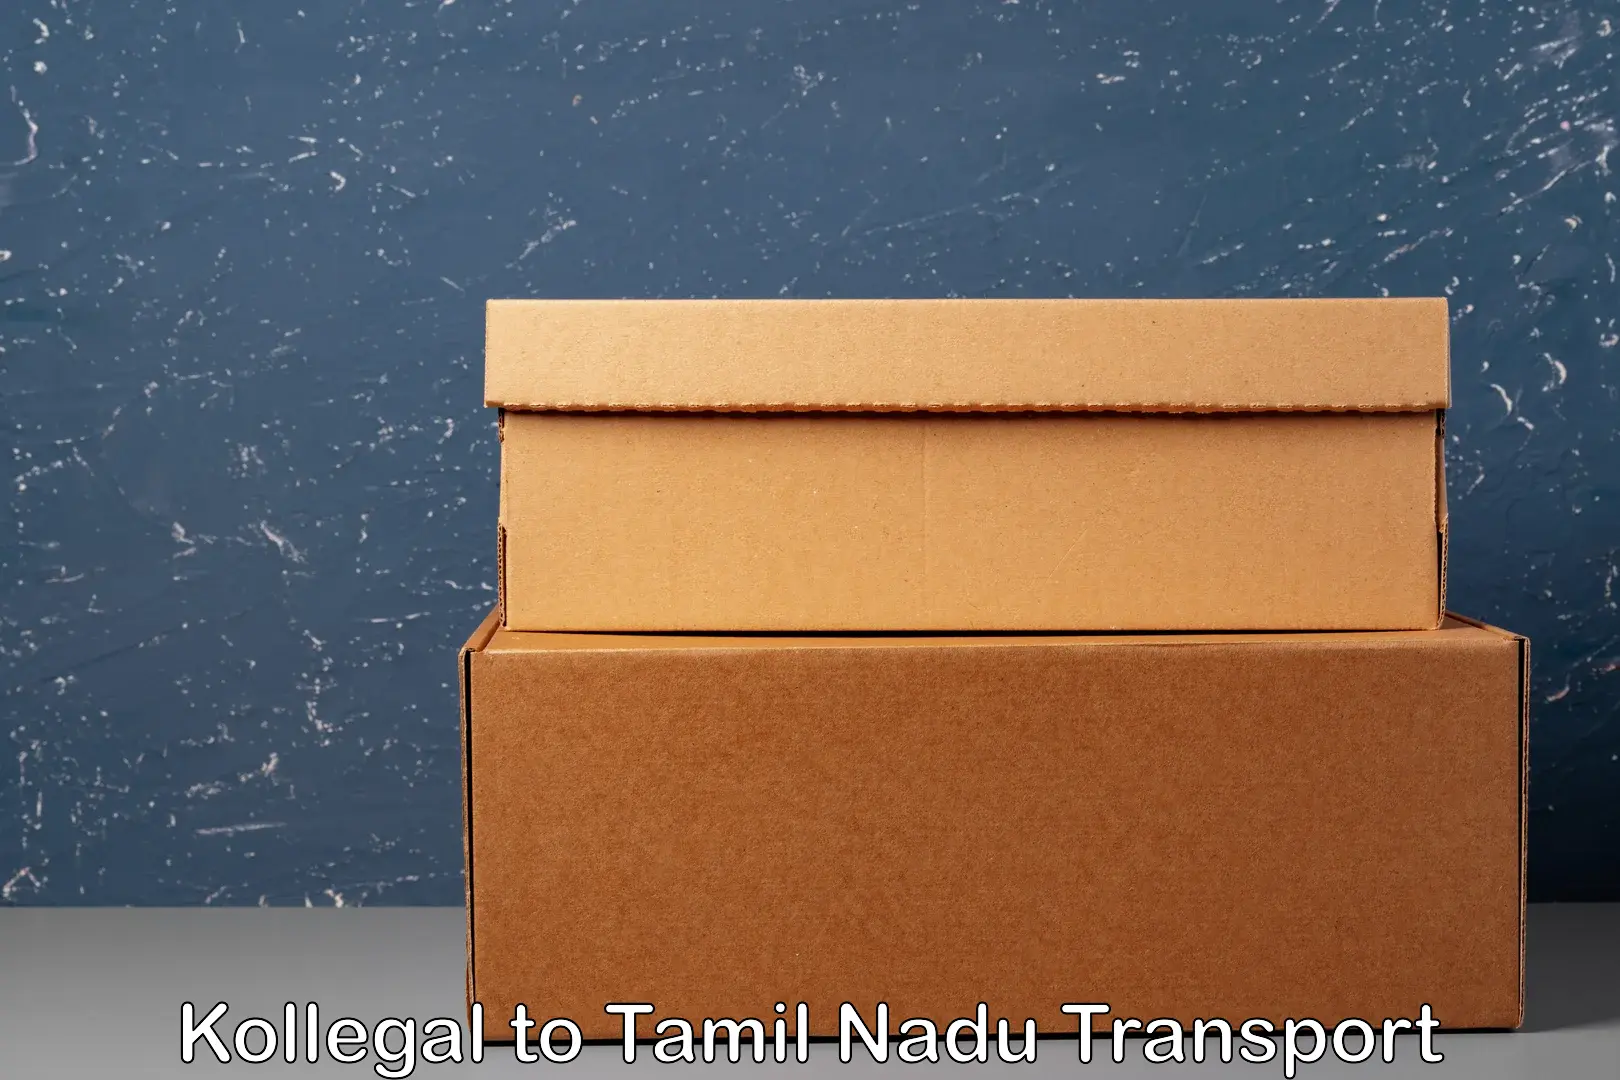 Express transport services in Kollegal to Tamil Nadu